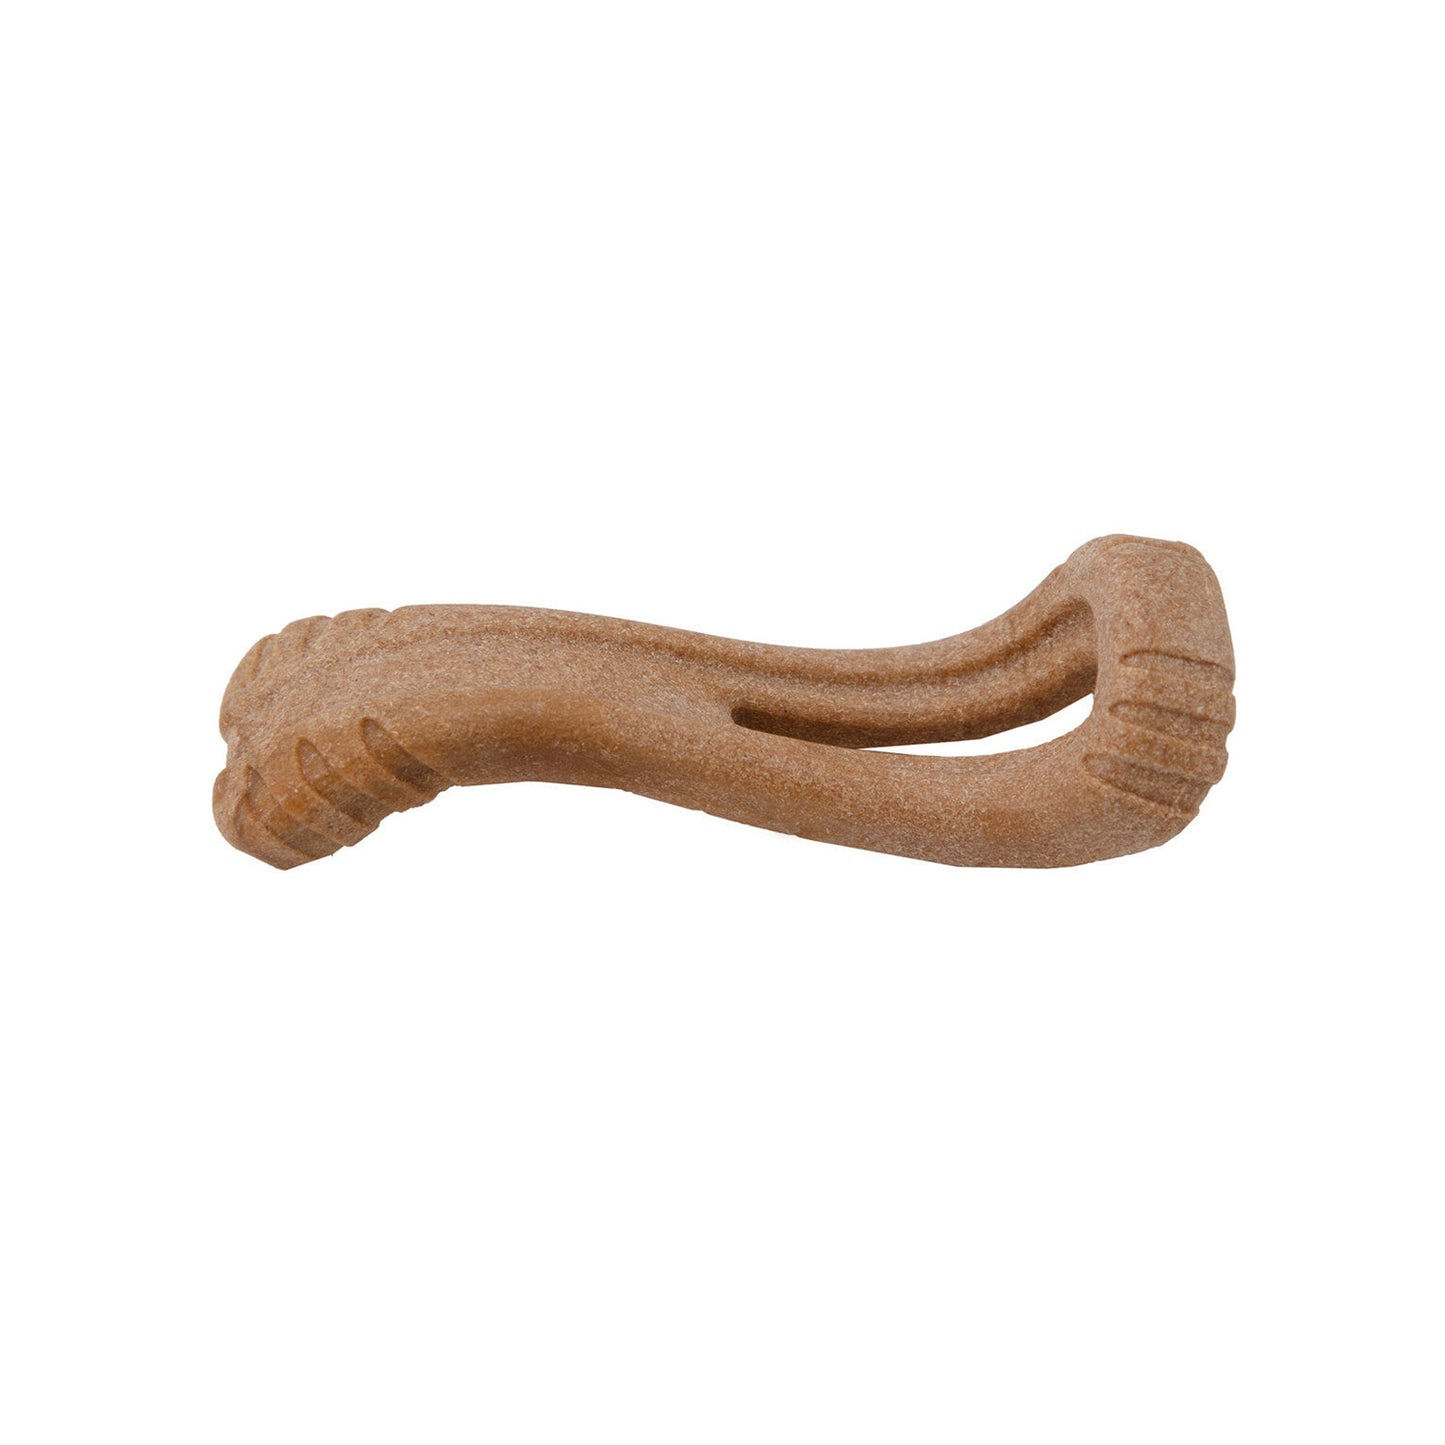 Petstages - Dogwood Flip and Chew Bone Toy For Dog